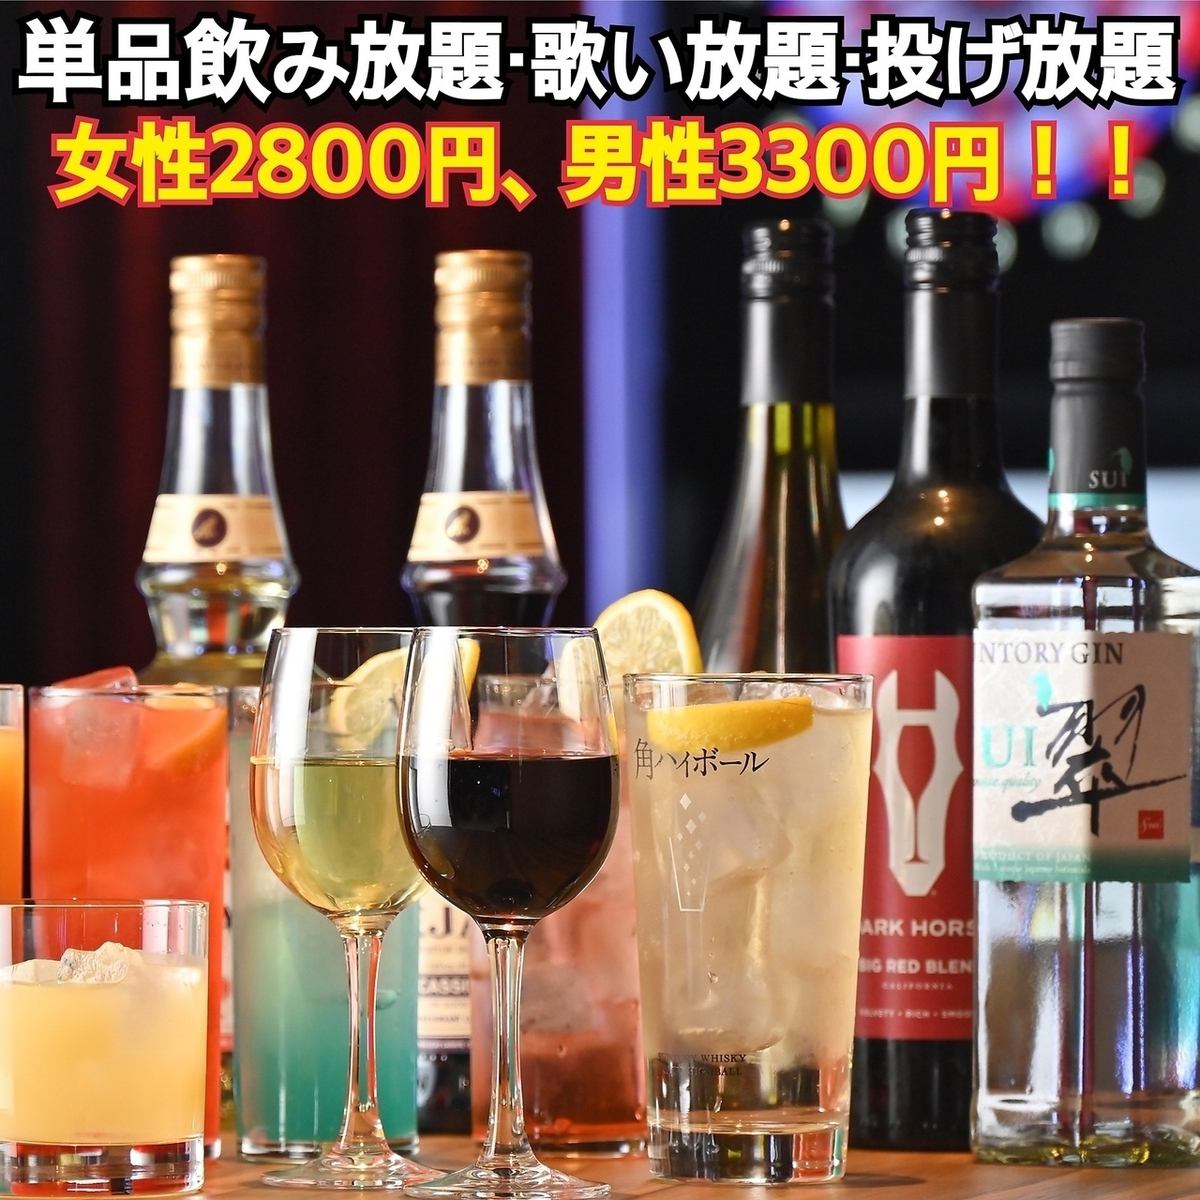 3 hours of all-you-can-drink, all-you-can-sing, all-you-can-play 2,800 yen for women, 3,300 yen for men★